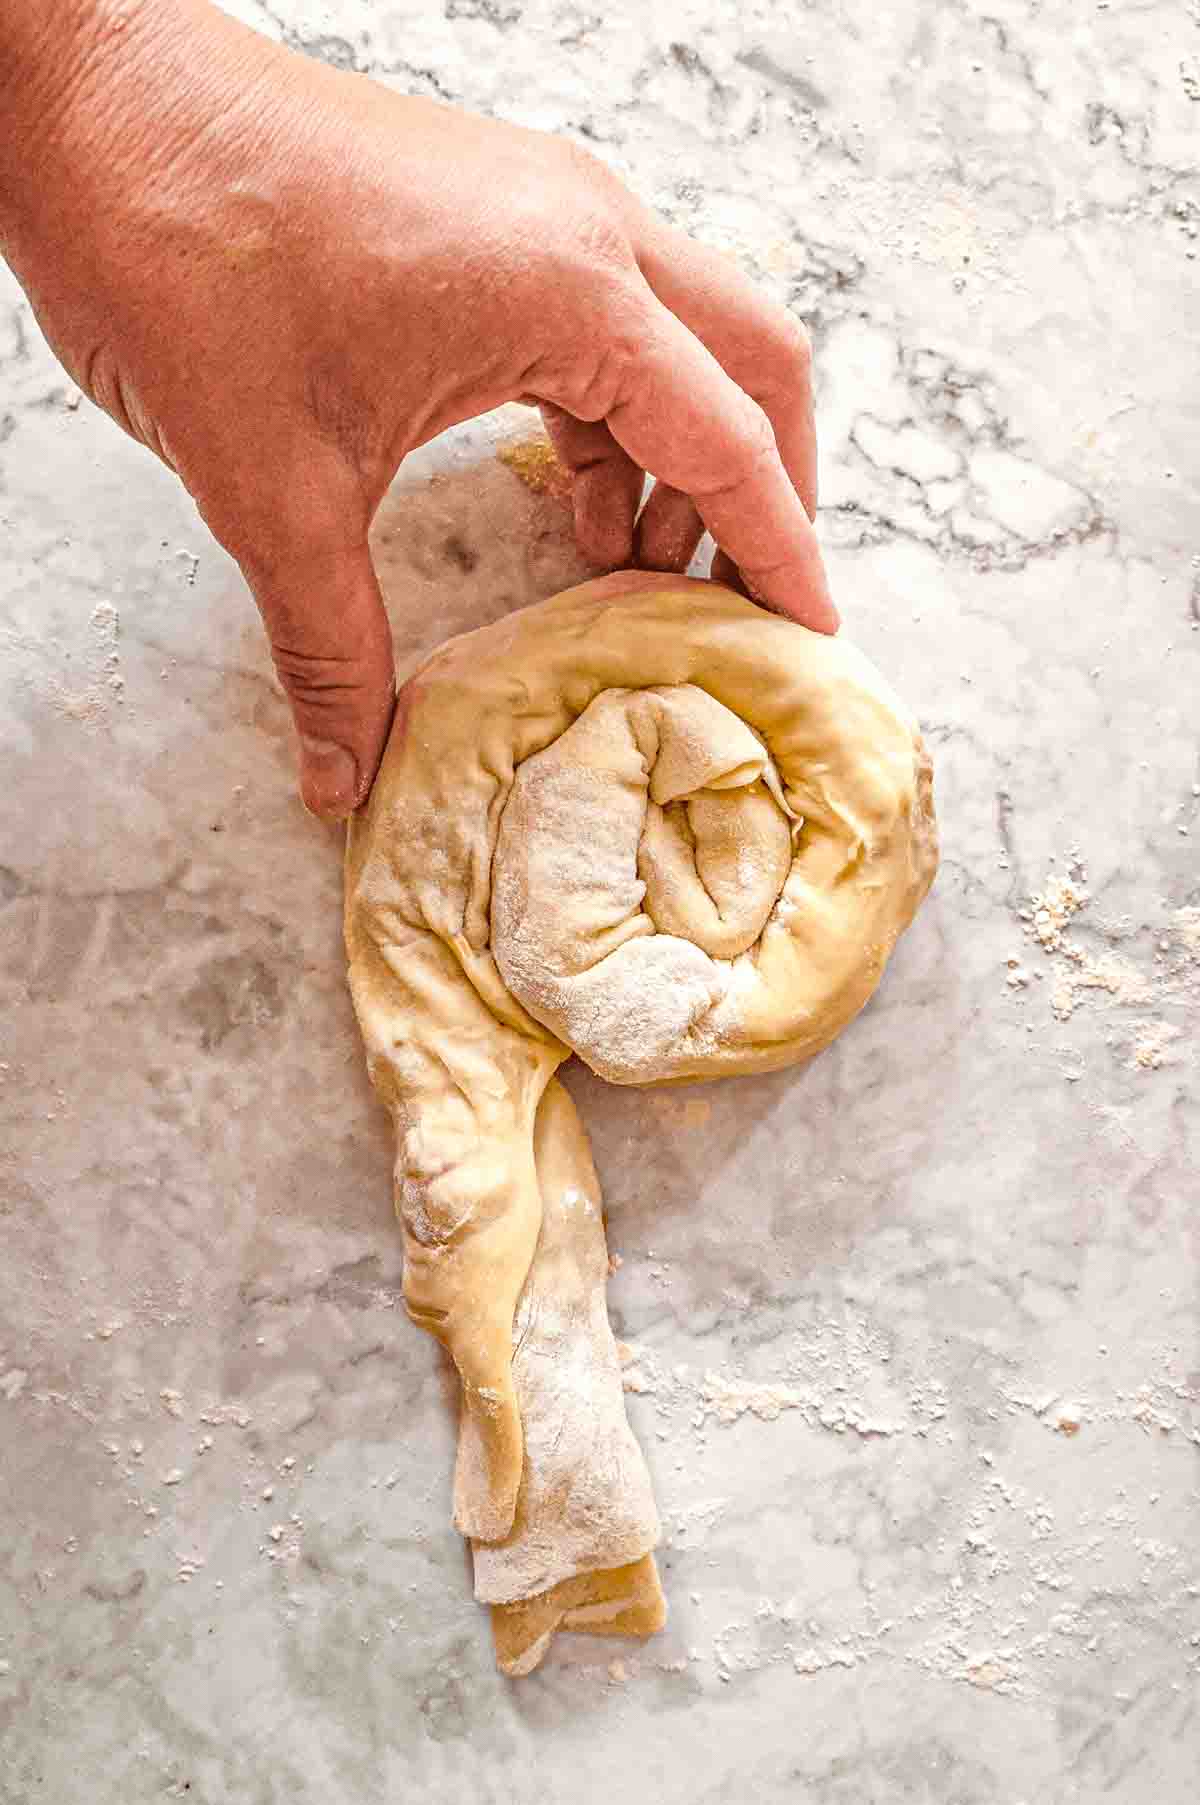 Step three of rolling out and filling phyllo dough: The stuffed phyllo dough carpet or cigar shape is being rolled into a spiral bun shape.